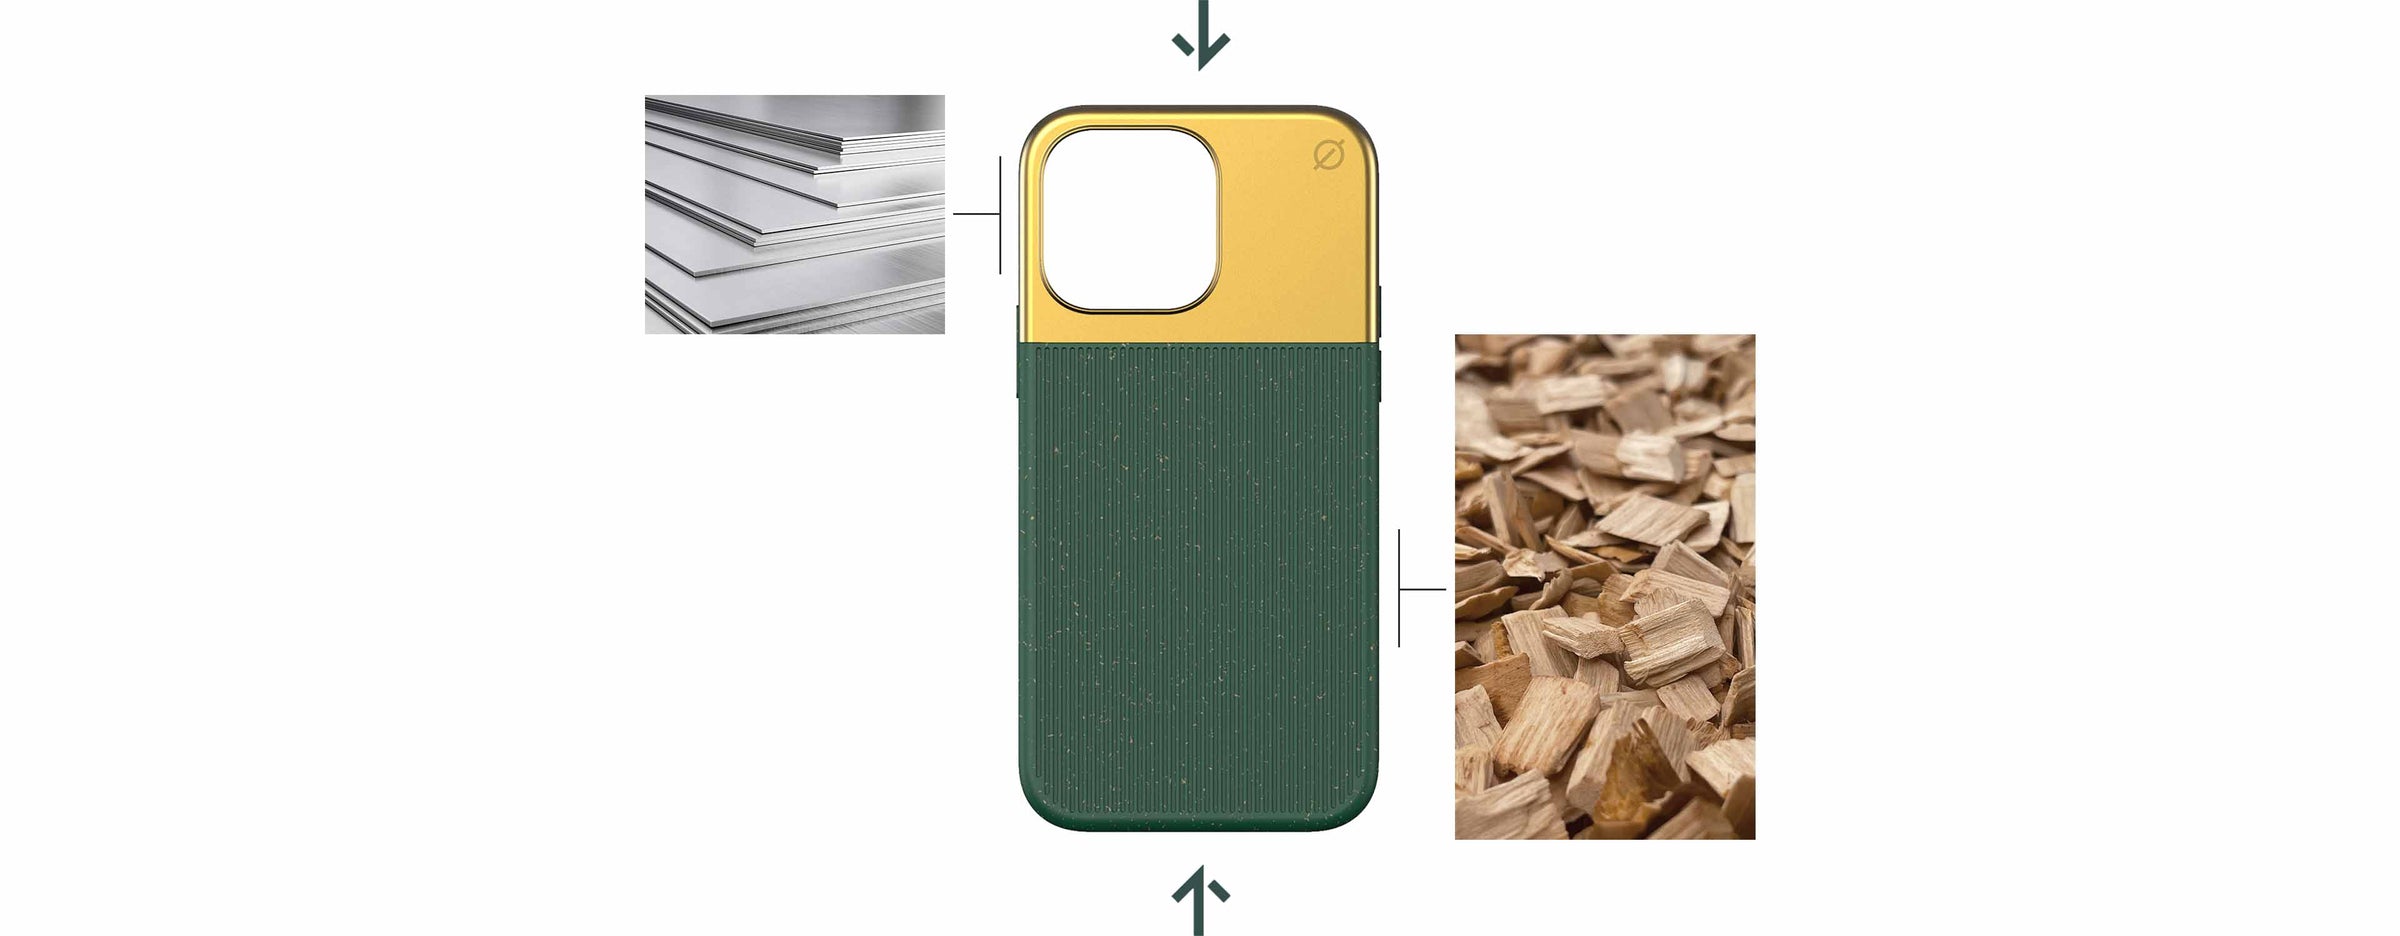 High quality premium materials. strong aluminum, recyclable eco materials. Hard wearing durable long lasting phone case. Protective metal phone case. Unique wood fibre material. Recycled wood sustainable planet friendly eco phone cover for iPhone 14 range